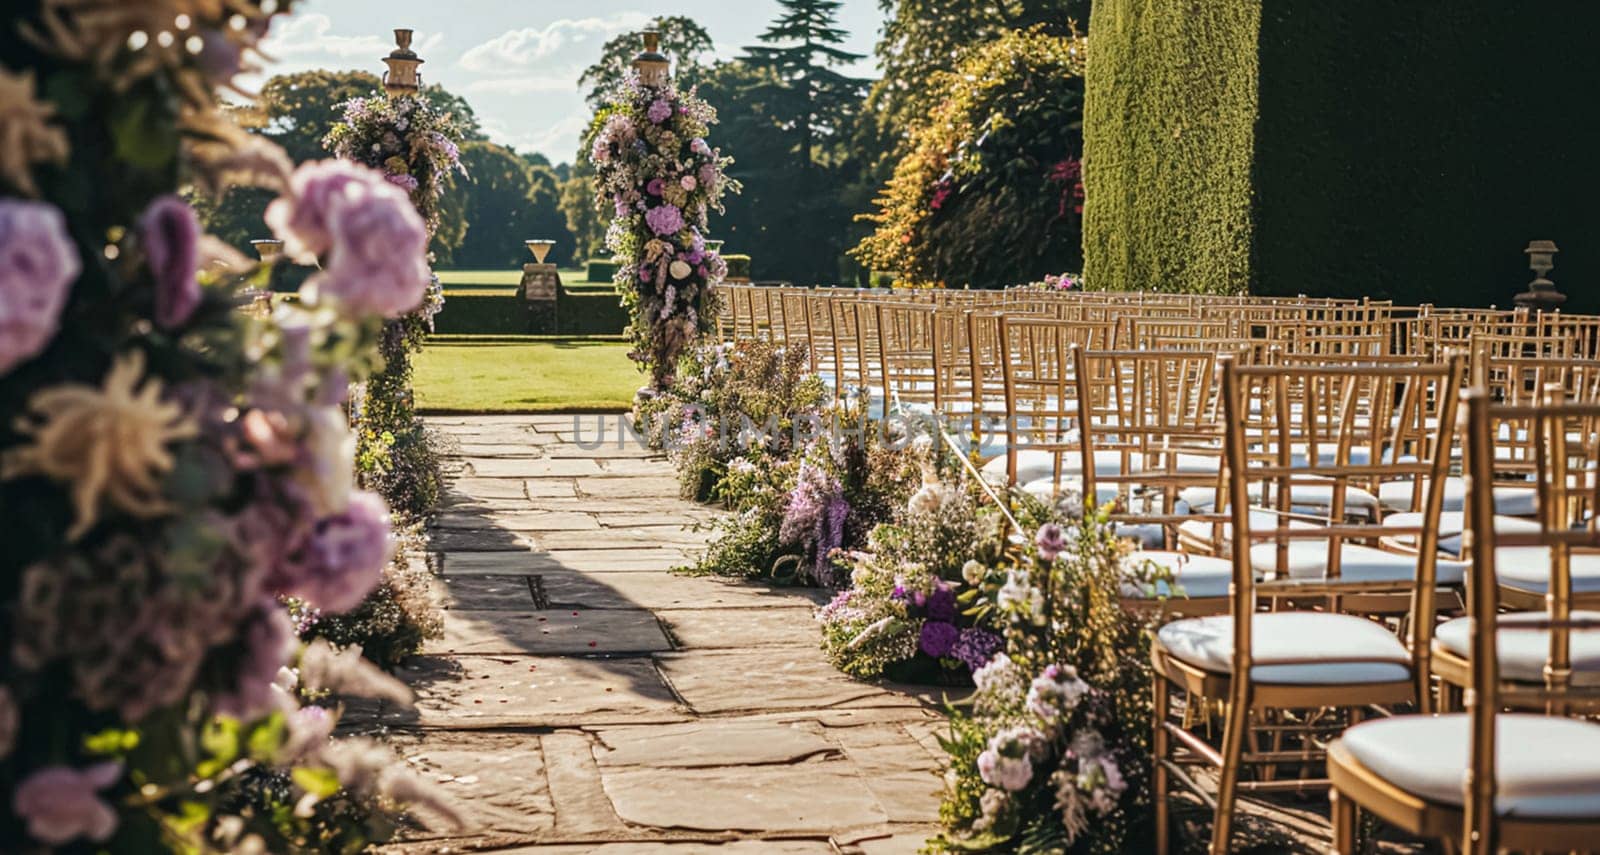 Wedding Ceremony Decorated with Lavender Flowers in the garden by Olayola